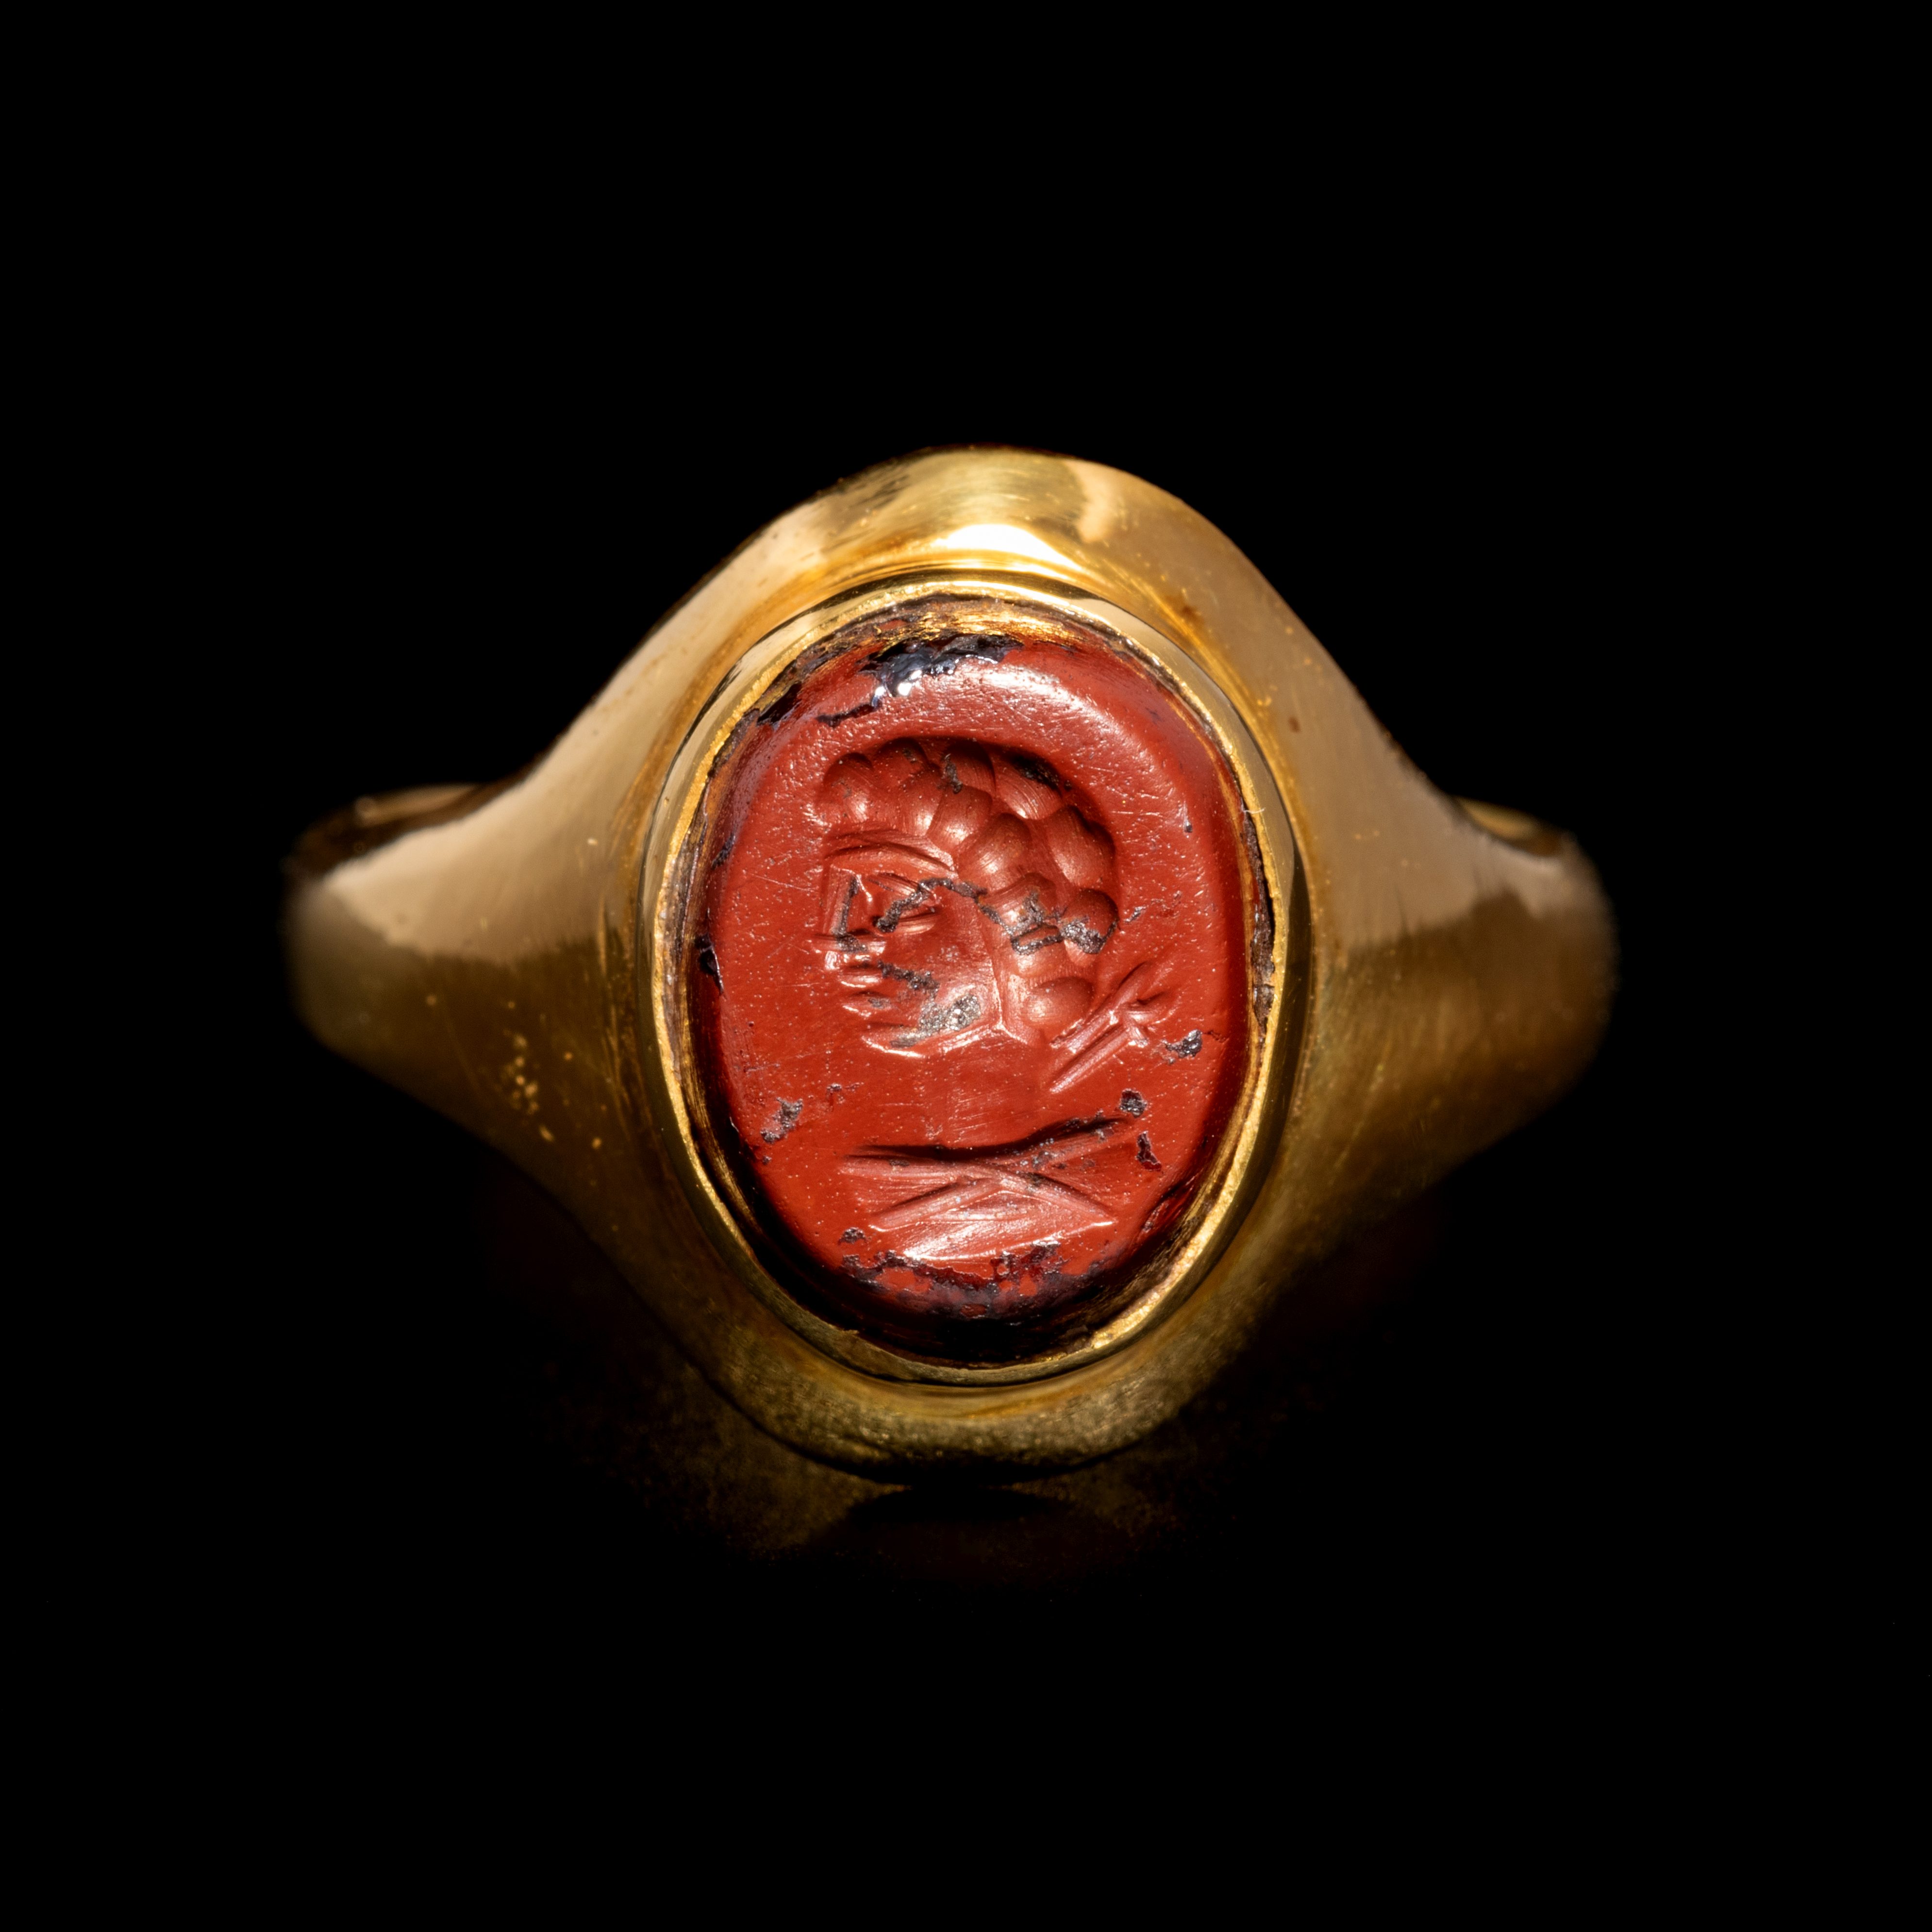 A Roman Gold and Red Jasper Finger Ring Engraved with the Bust of a Man Ring size 6 1/2; Diameter of - Image 2 of 3